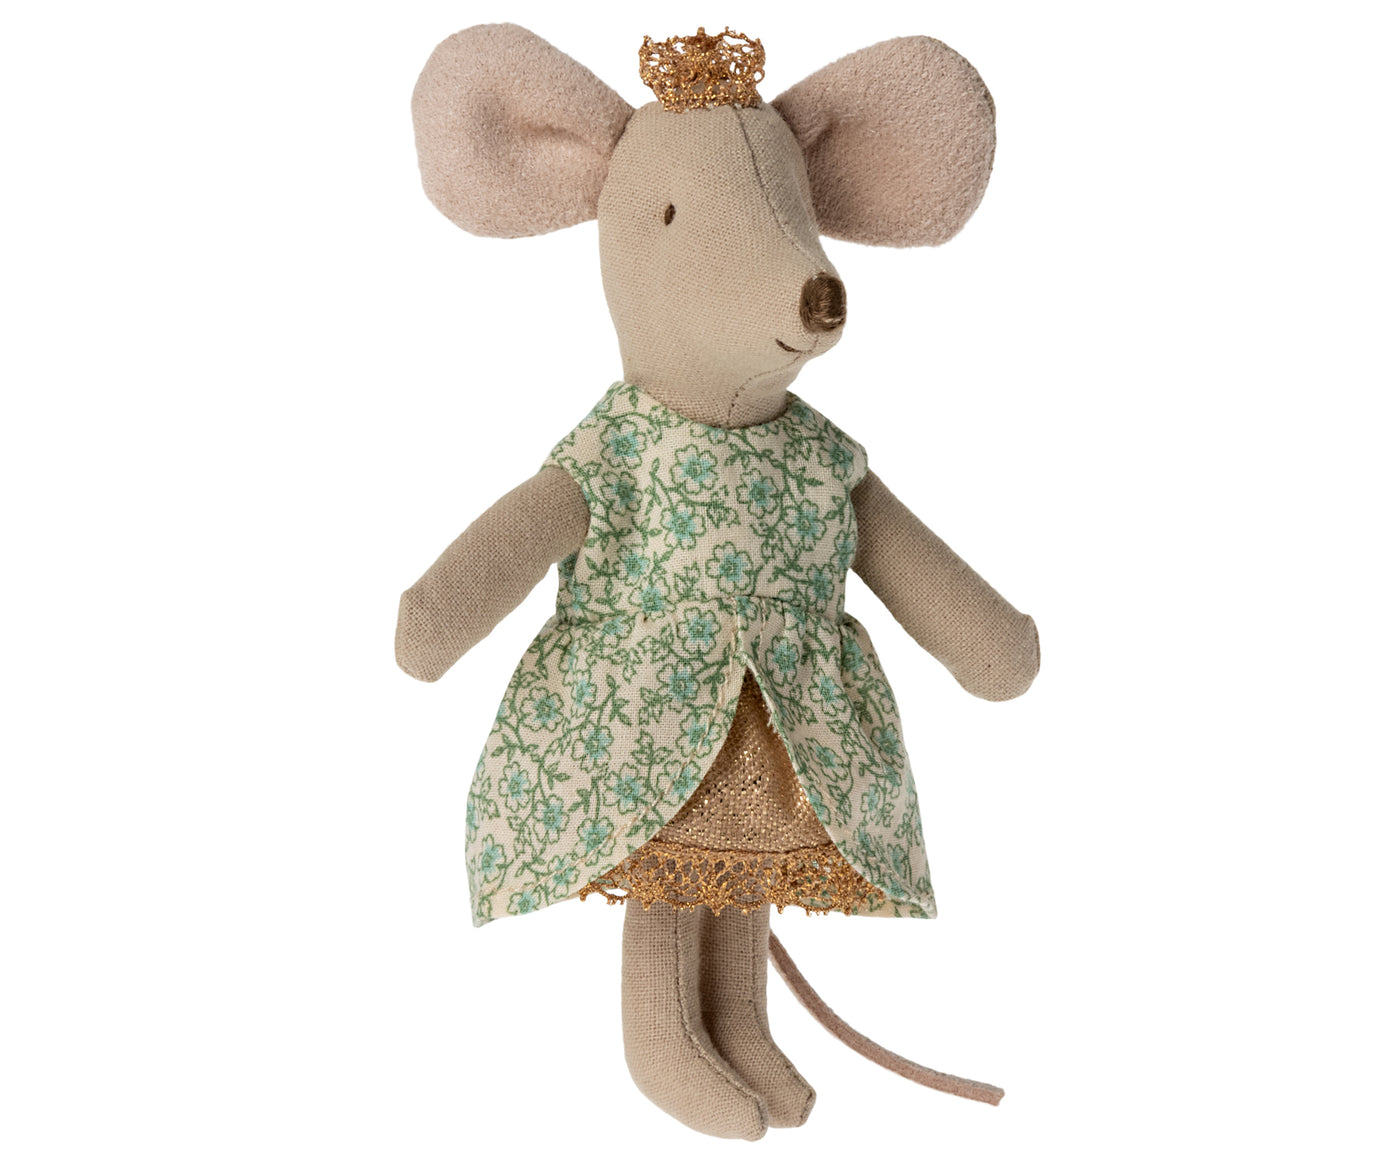 Maileg Princess Mouse - Little Sister in Matchbox